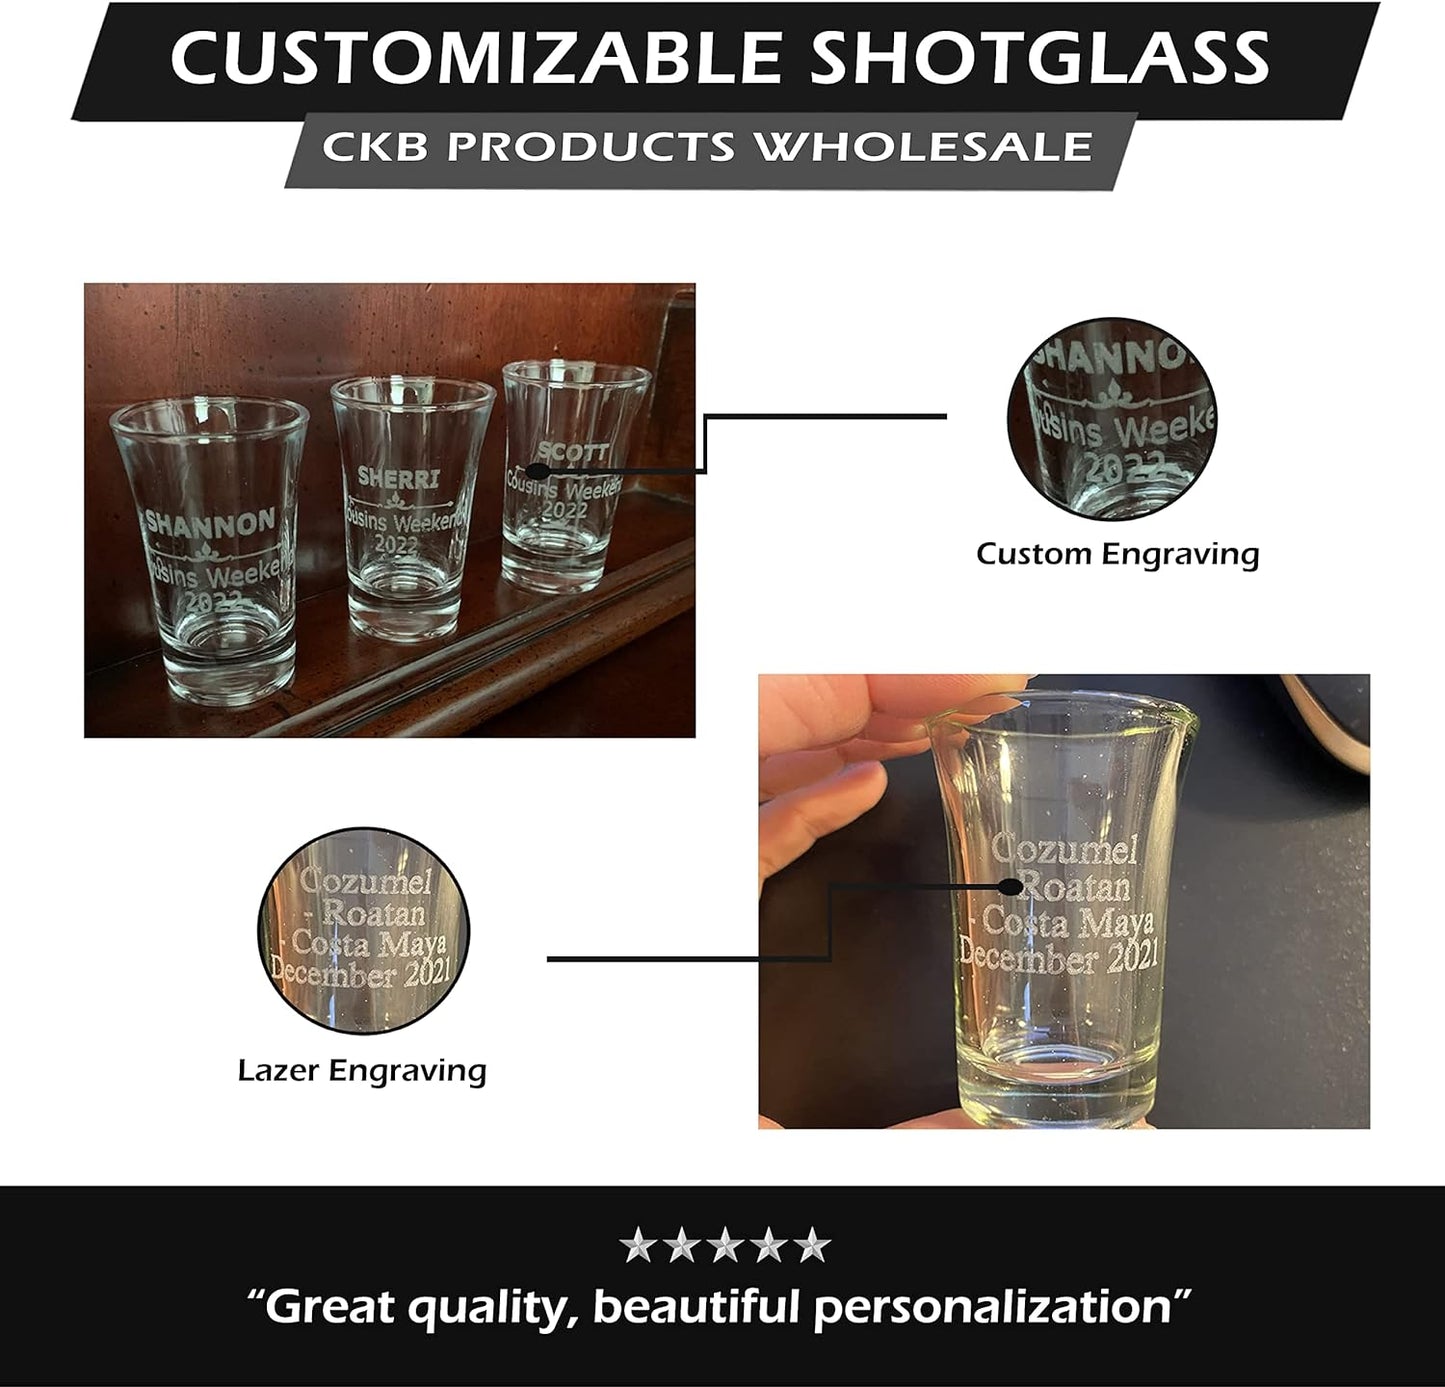 Set of 6 Personalized Shot Glasses, 1.5oz, Customized Couples Gifts, House Warming - Great for Wedding Favors, Bachelorette Party, Decorations, Favors